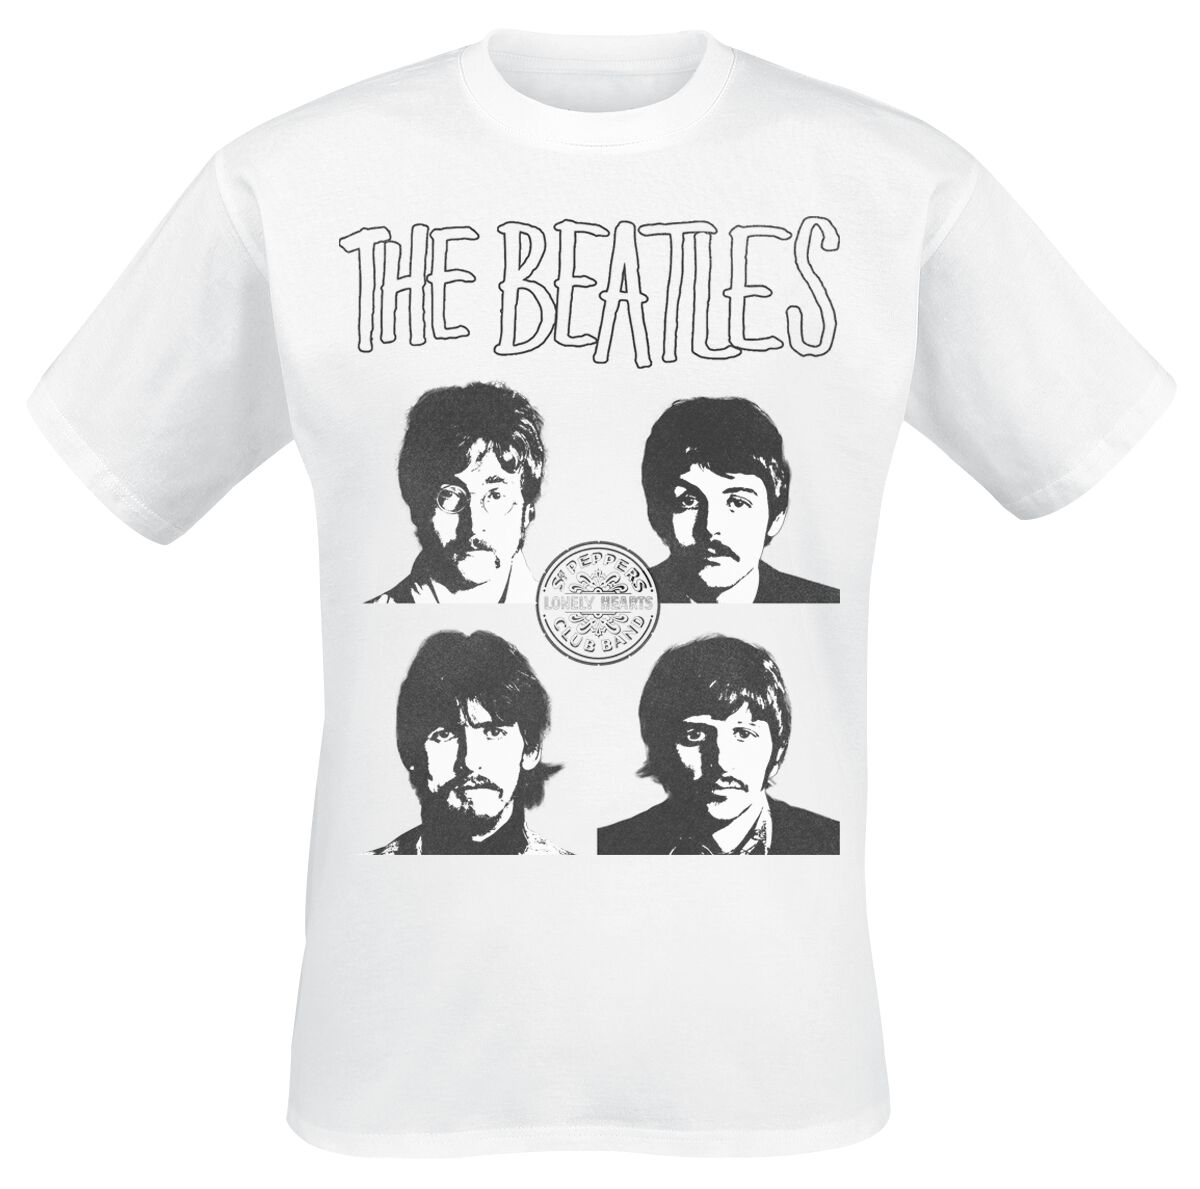 The Beatles Sgt. Peppers Portrais T-Shirt weiß in L